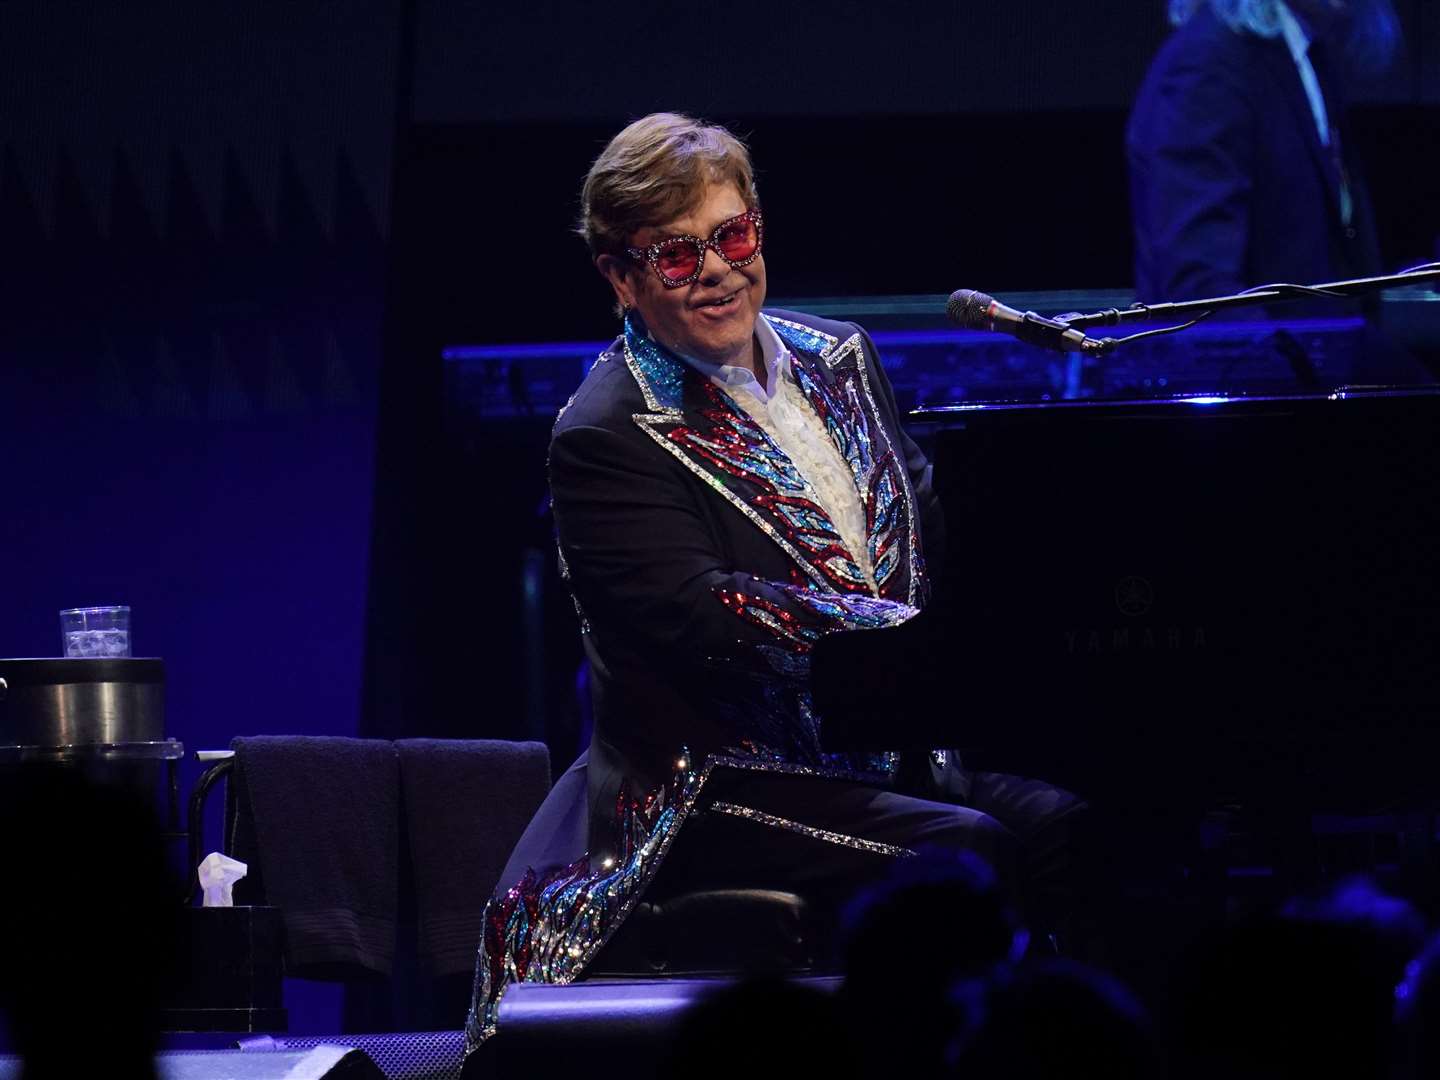 Sir Elton John performs on stage during the final date of his Farewell Yellow Brick Road show at the Tele2 Arena in Stockholm, Sweden (Yui Mok/PA)